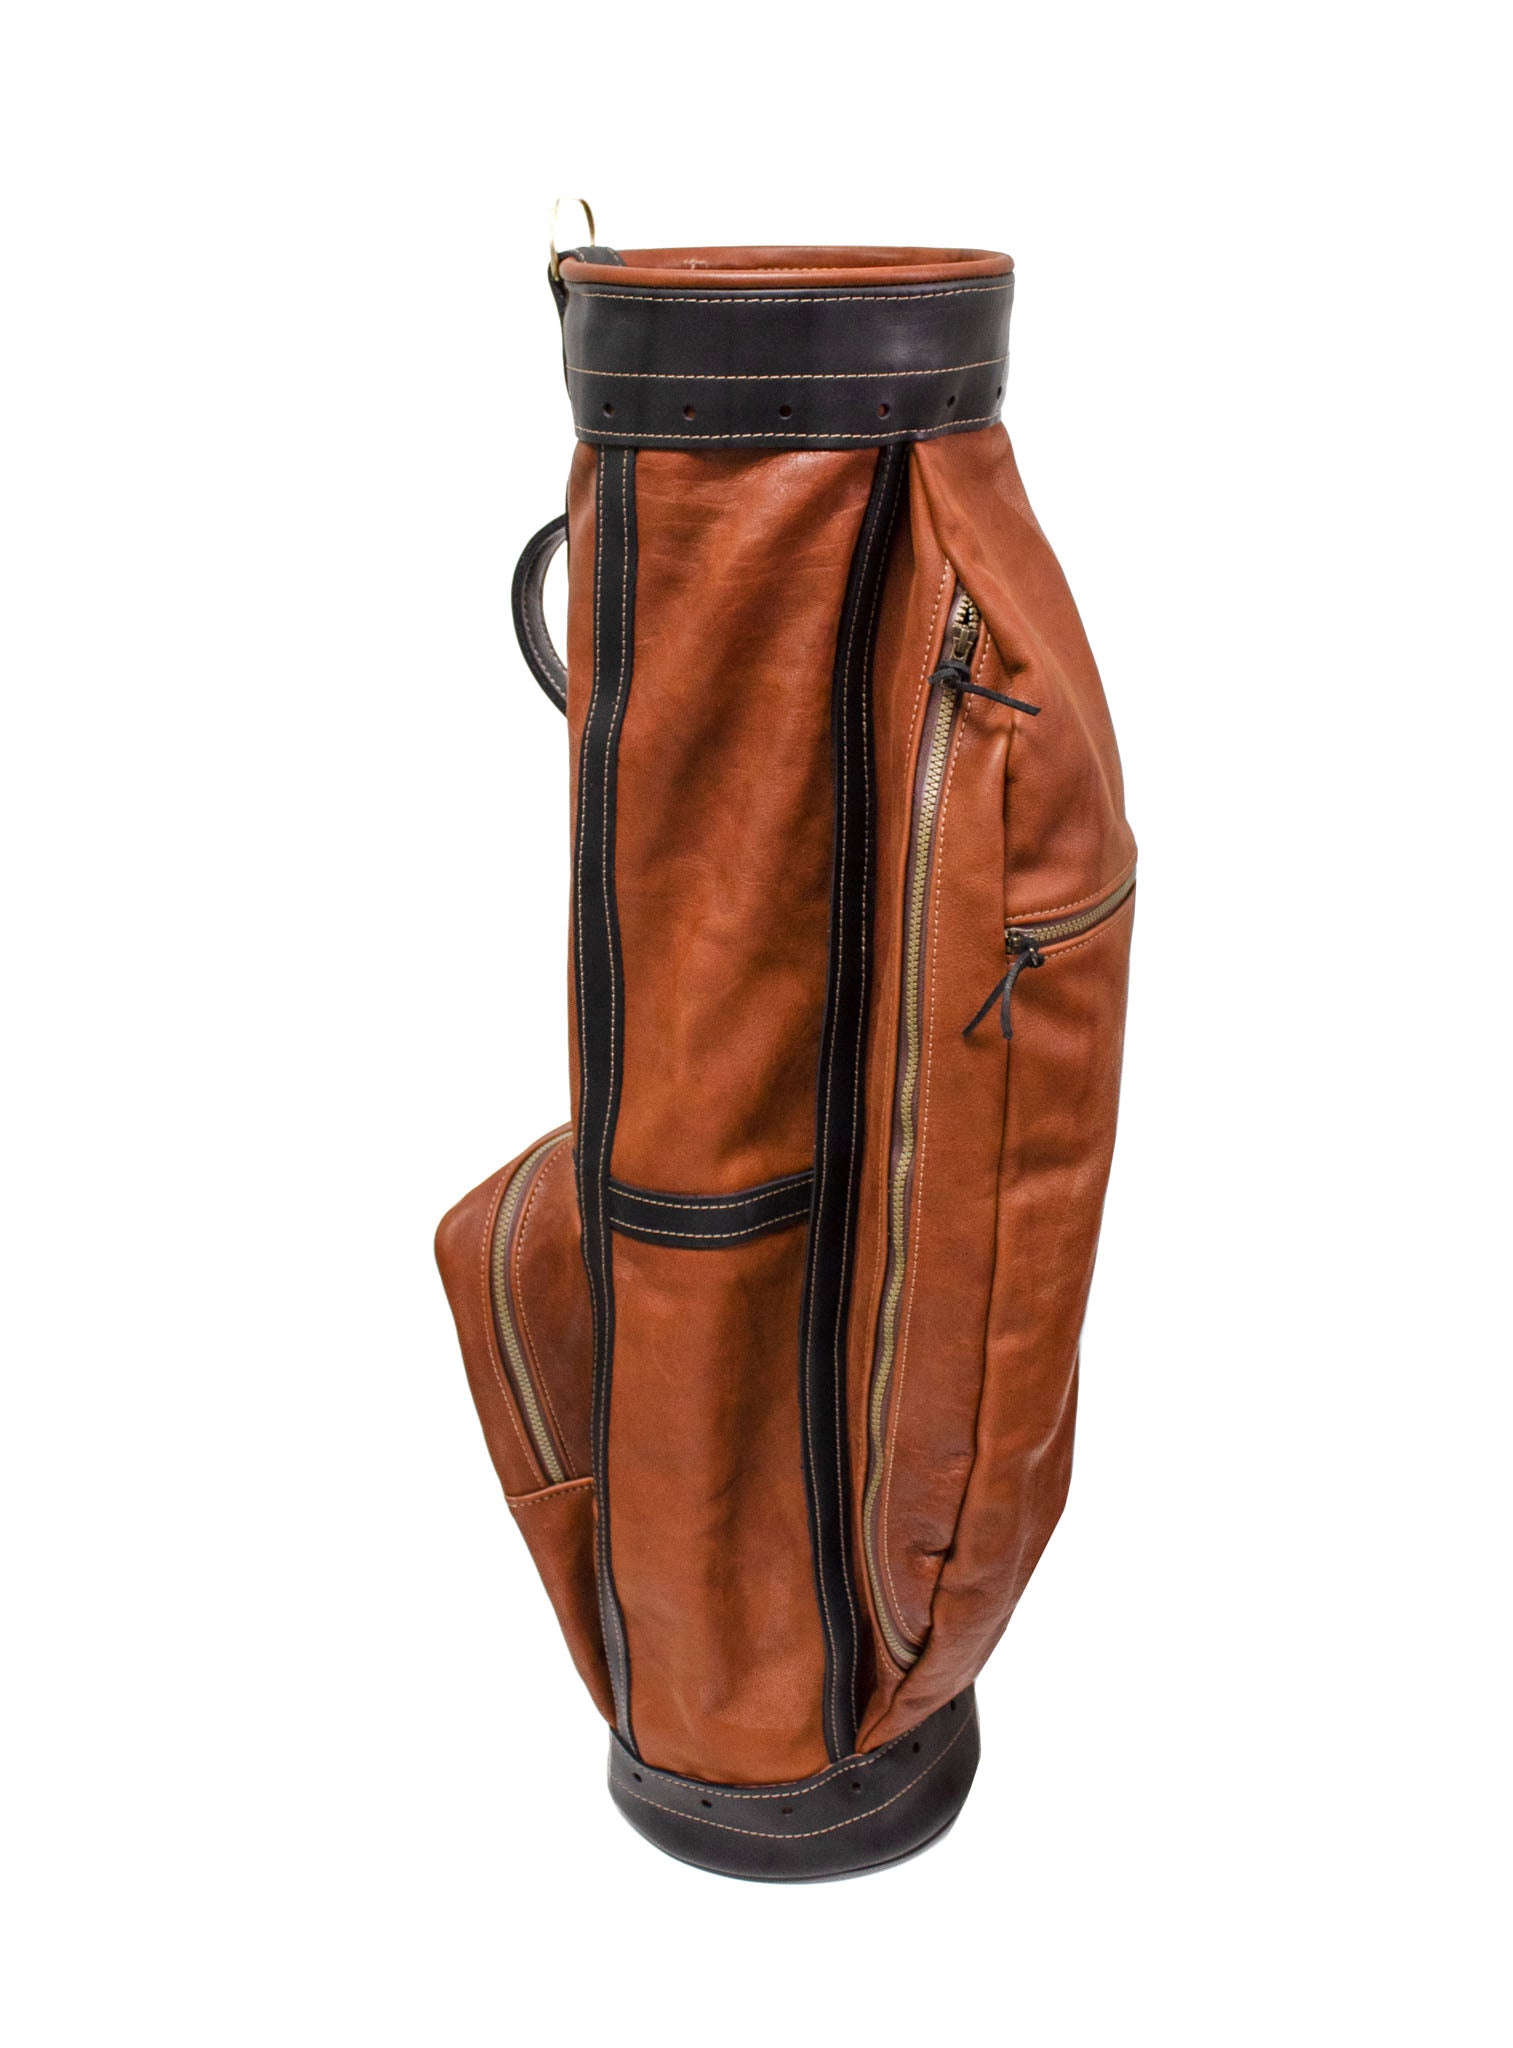 Chestnut Leather and Black Leather Trim Staff Style Golf Bag Back- Steurer & Jacoby